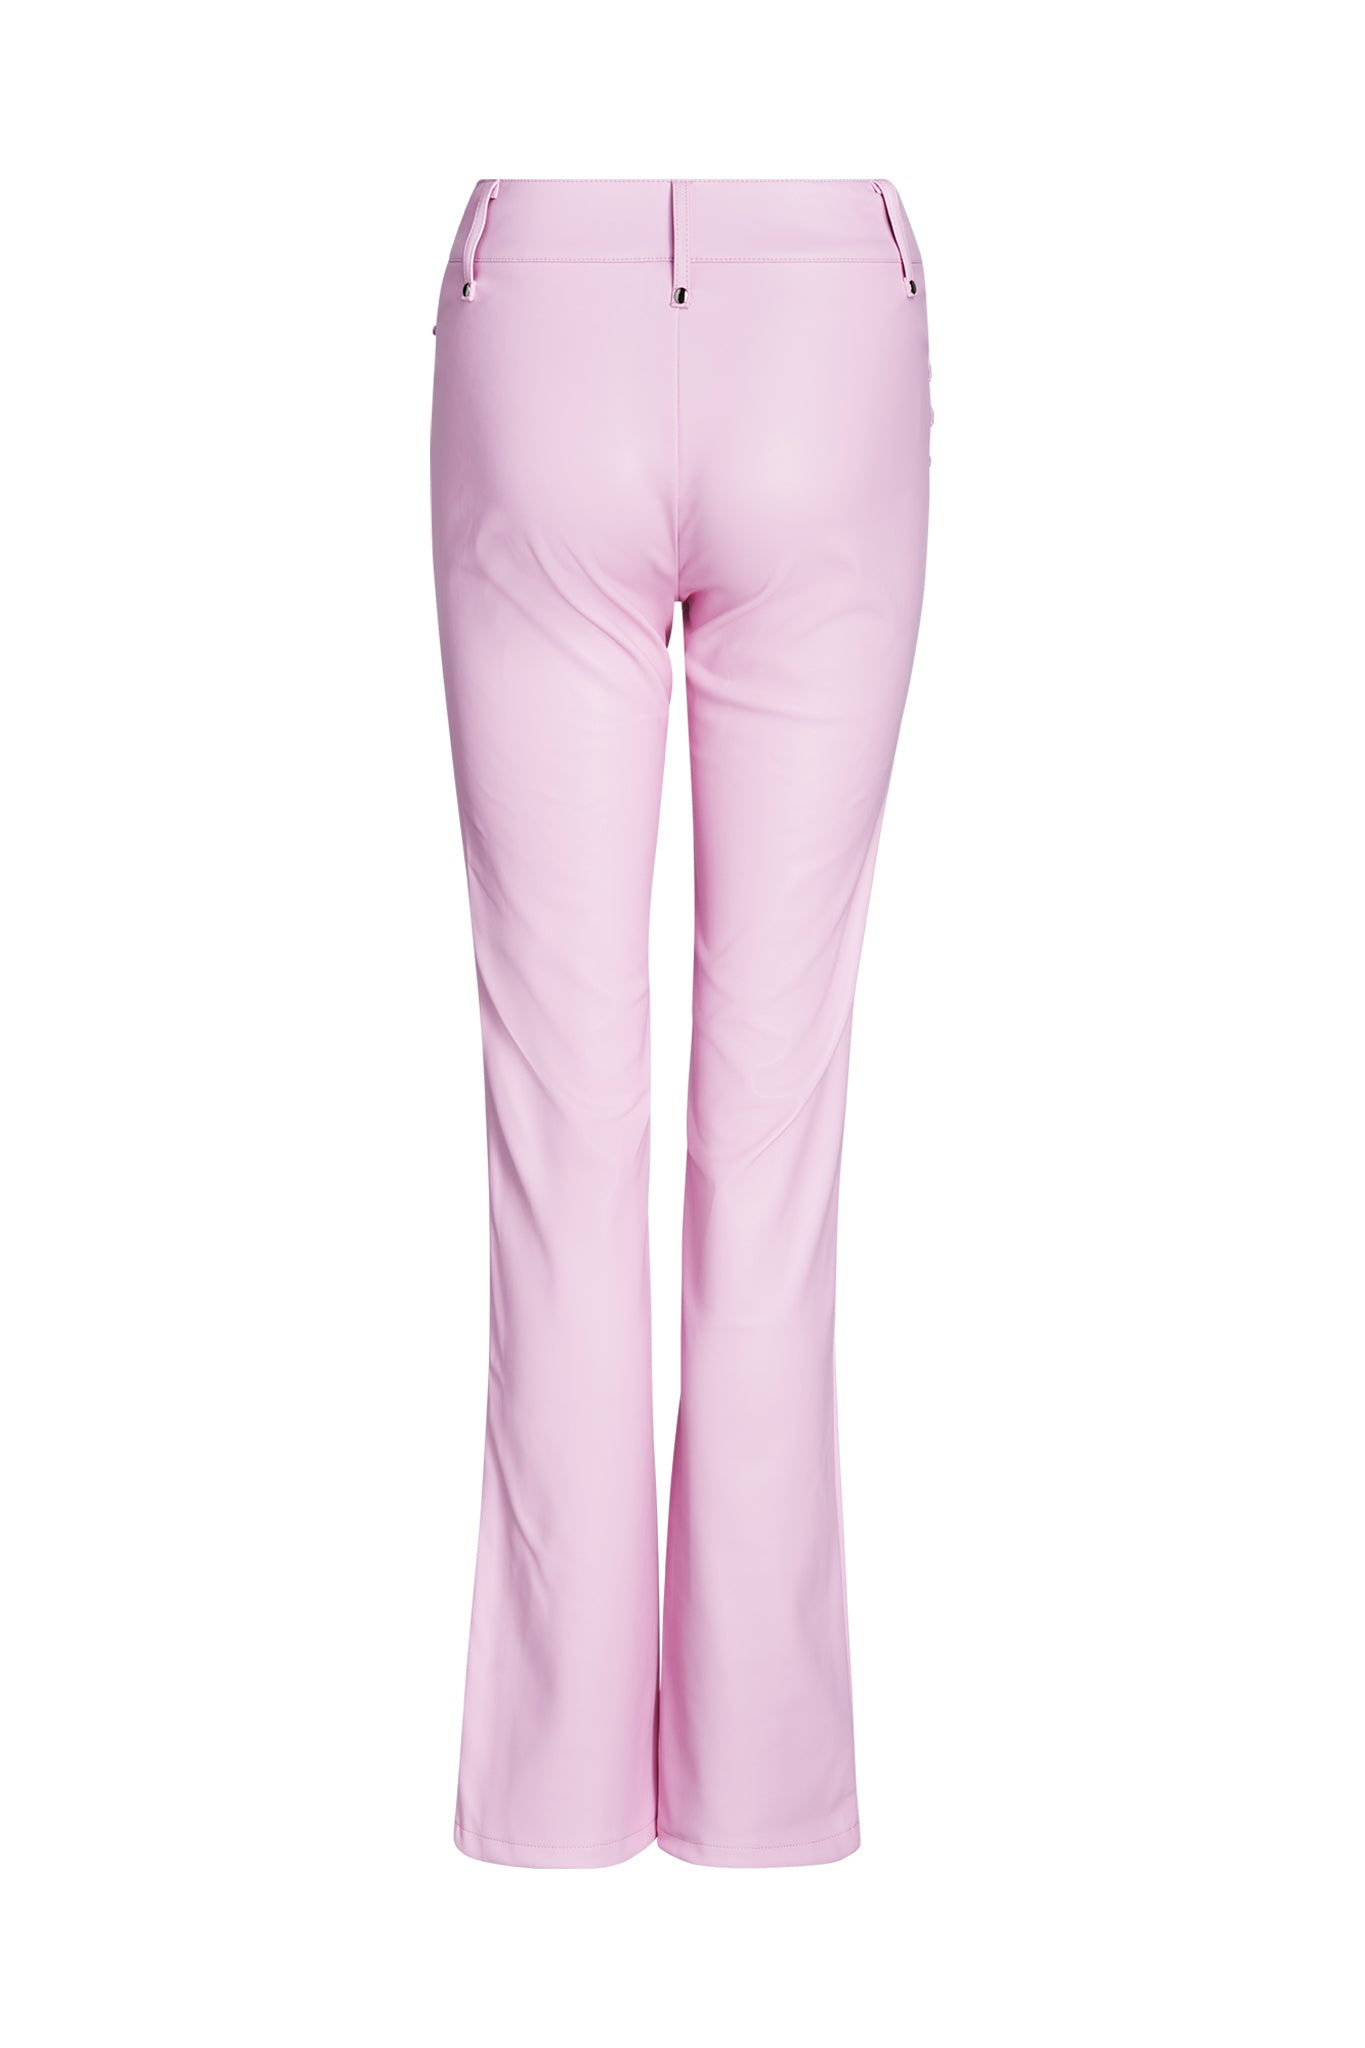 Shop Pants Gia Plastic Pink from AGGI at Seezona